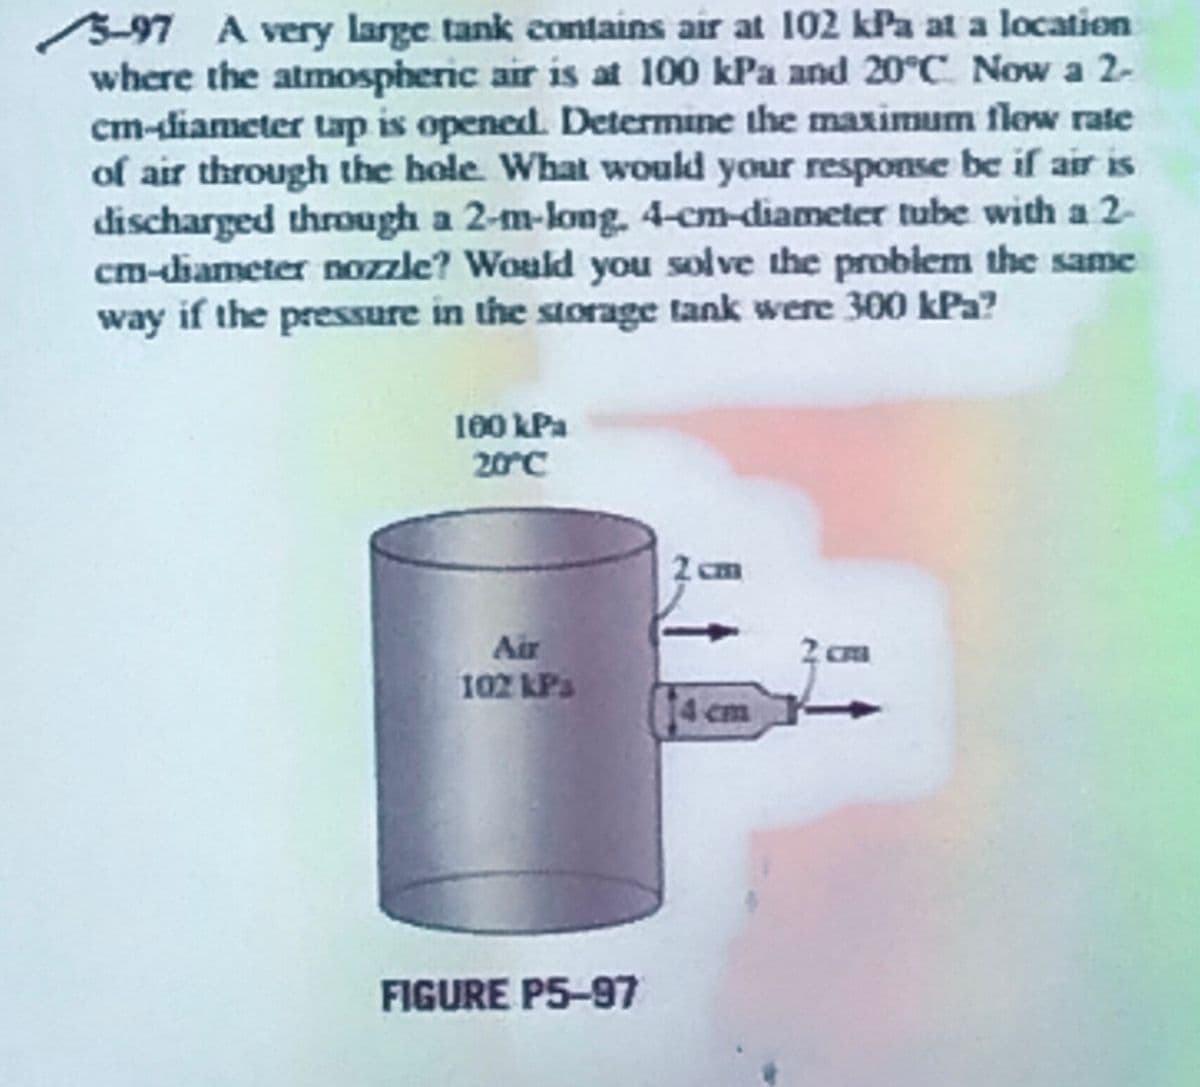 5-97 A very large tank contains air at 102 kPa at a location
where the atmospheric air is at 100 kPa and 20°C Now a 2-
cm-diameter tap is opened. Determine the maximum flow rate
of air through the hole. What would your response be if air is
discharged through a 2-m-long. 4-cm-diameter tube with a 2-
cm-diameter nozzle? Would you solve the problem the same
way if the pressure in the storage tank were 300 kPa?
100 kPa
20°C
Air
102 kPa
FIGURE P5-97
2 cm
14 cm